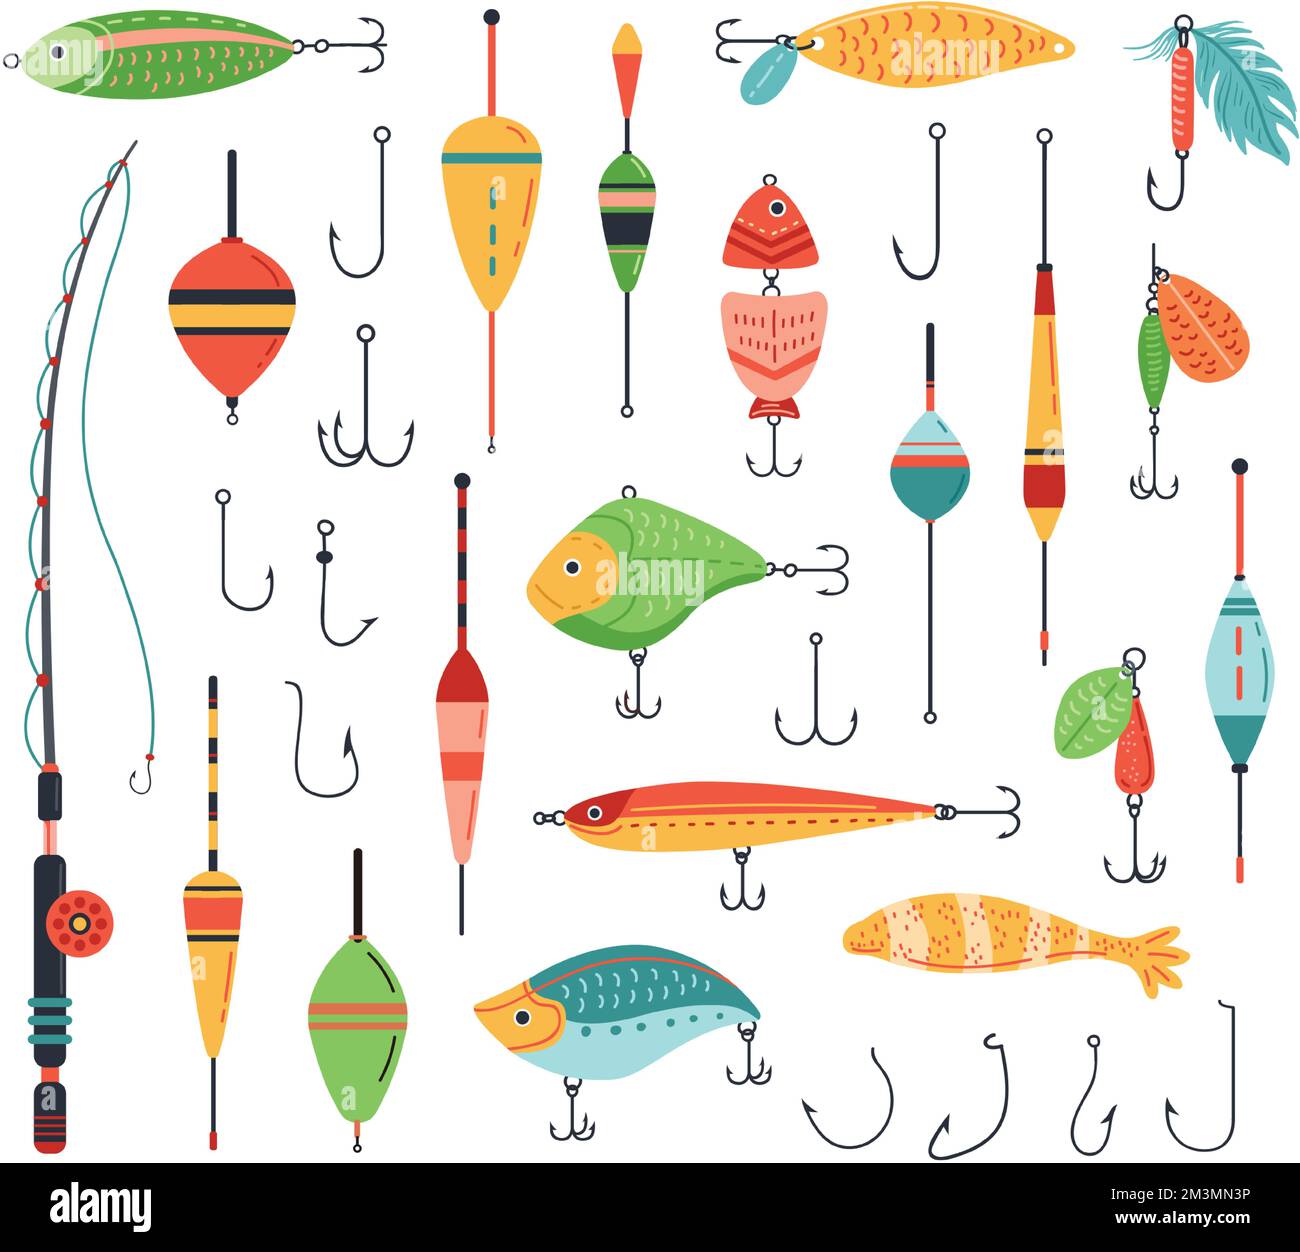 https://c8.alamy.com/comp/2M3MN3P/fishing-accessories-fish-bait-with-hook-fisherman-rod-and-tackle-with-artificial-fishes-shapes-vector-set-seasonal-hobby-activity-equipment-for-cat-2M3MN3P.jpg